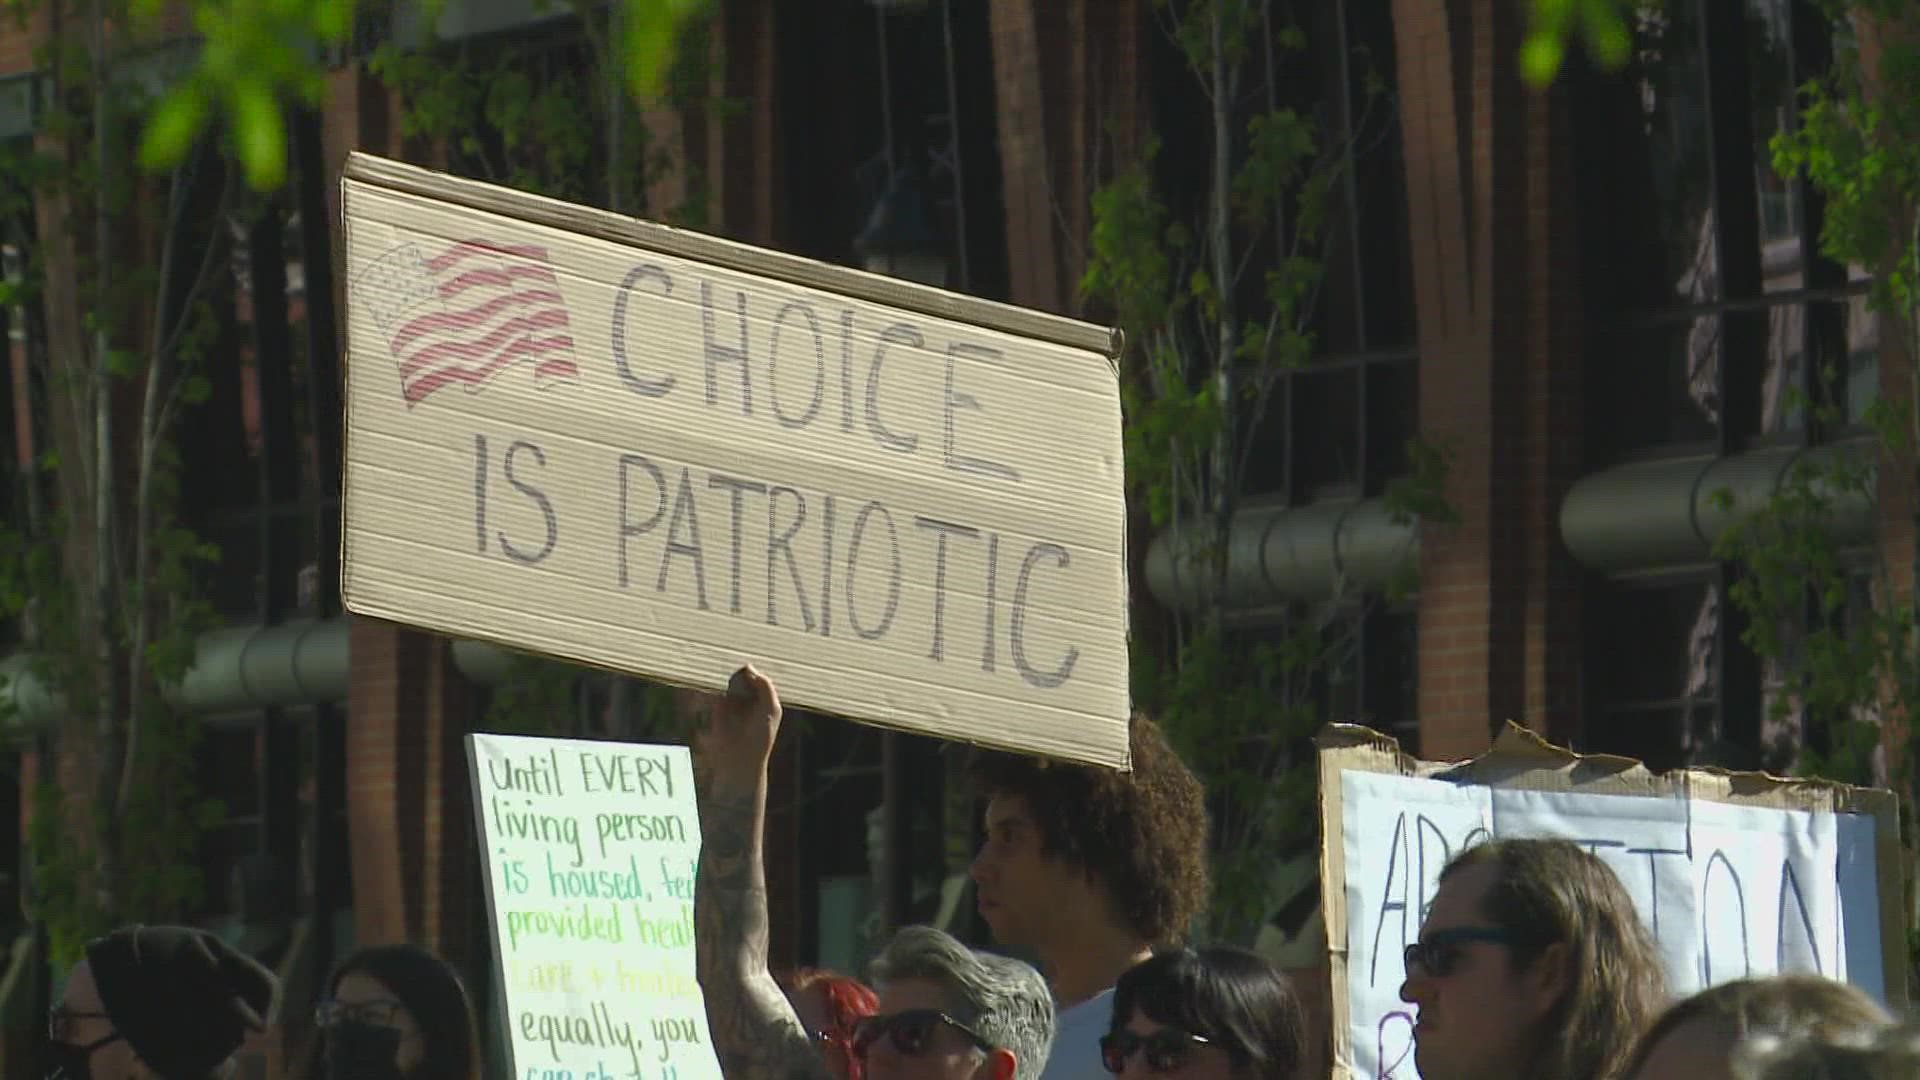 Many people in Washington and Idaho voiced their opinions on the supreme court's decision, which caused a ripple around the country and the Inland Northwest.